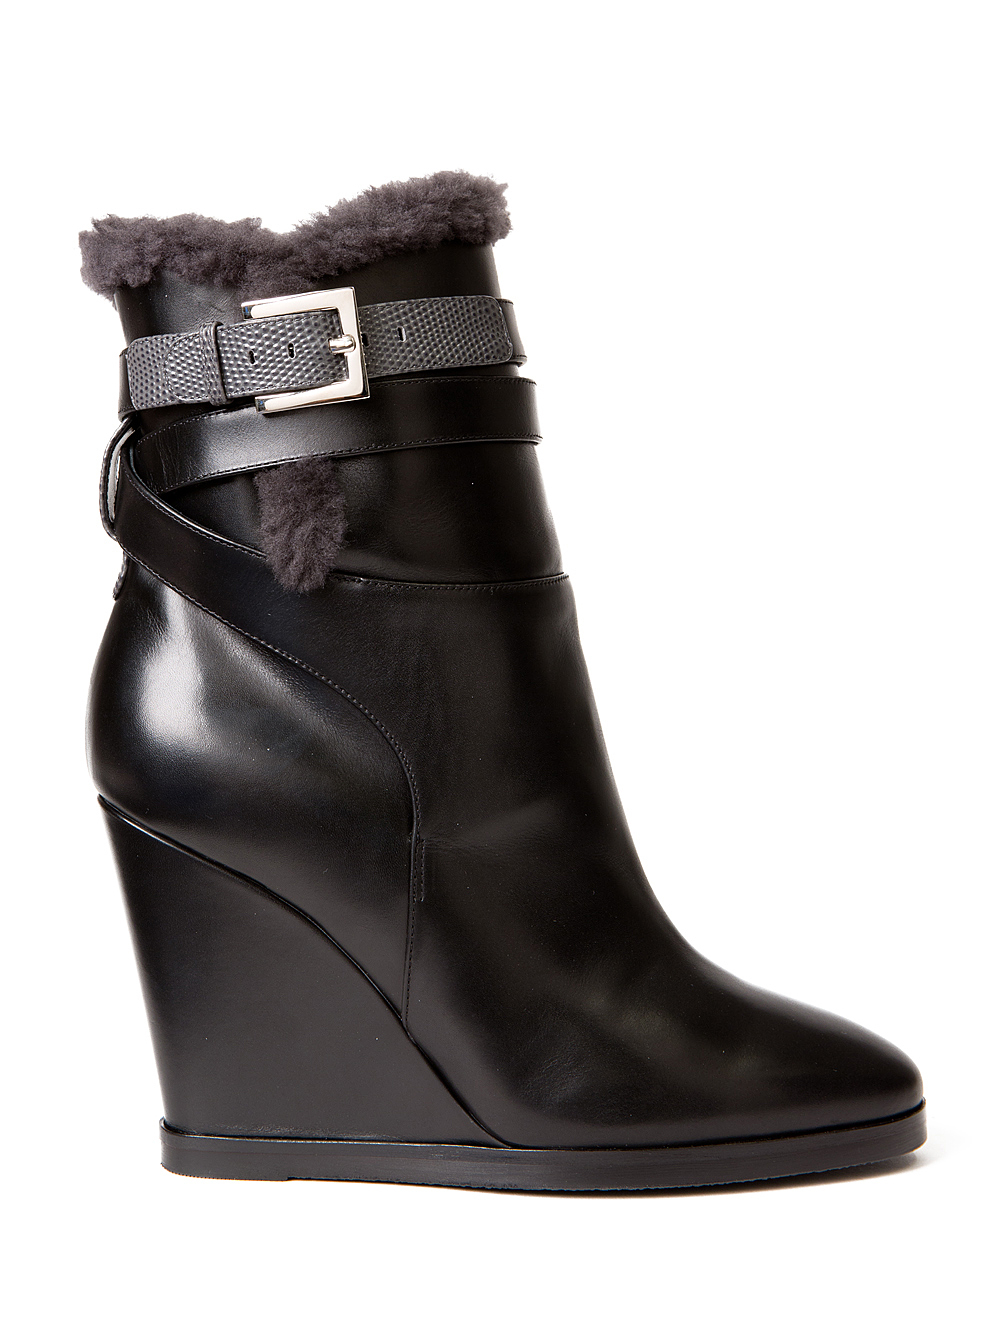 Fendi Shearling Leather Wedge Boots in Black - Lyst